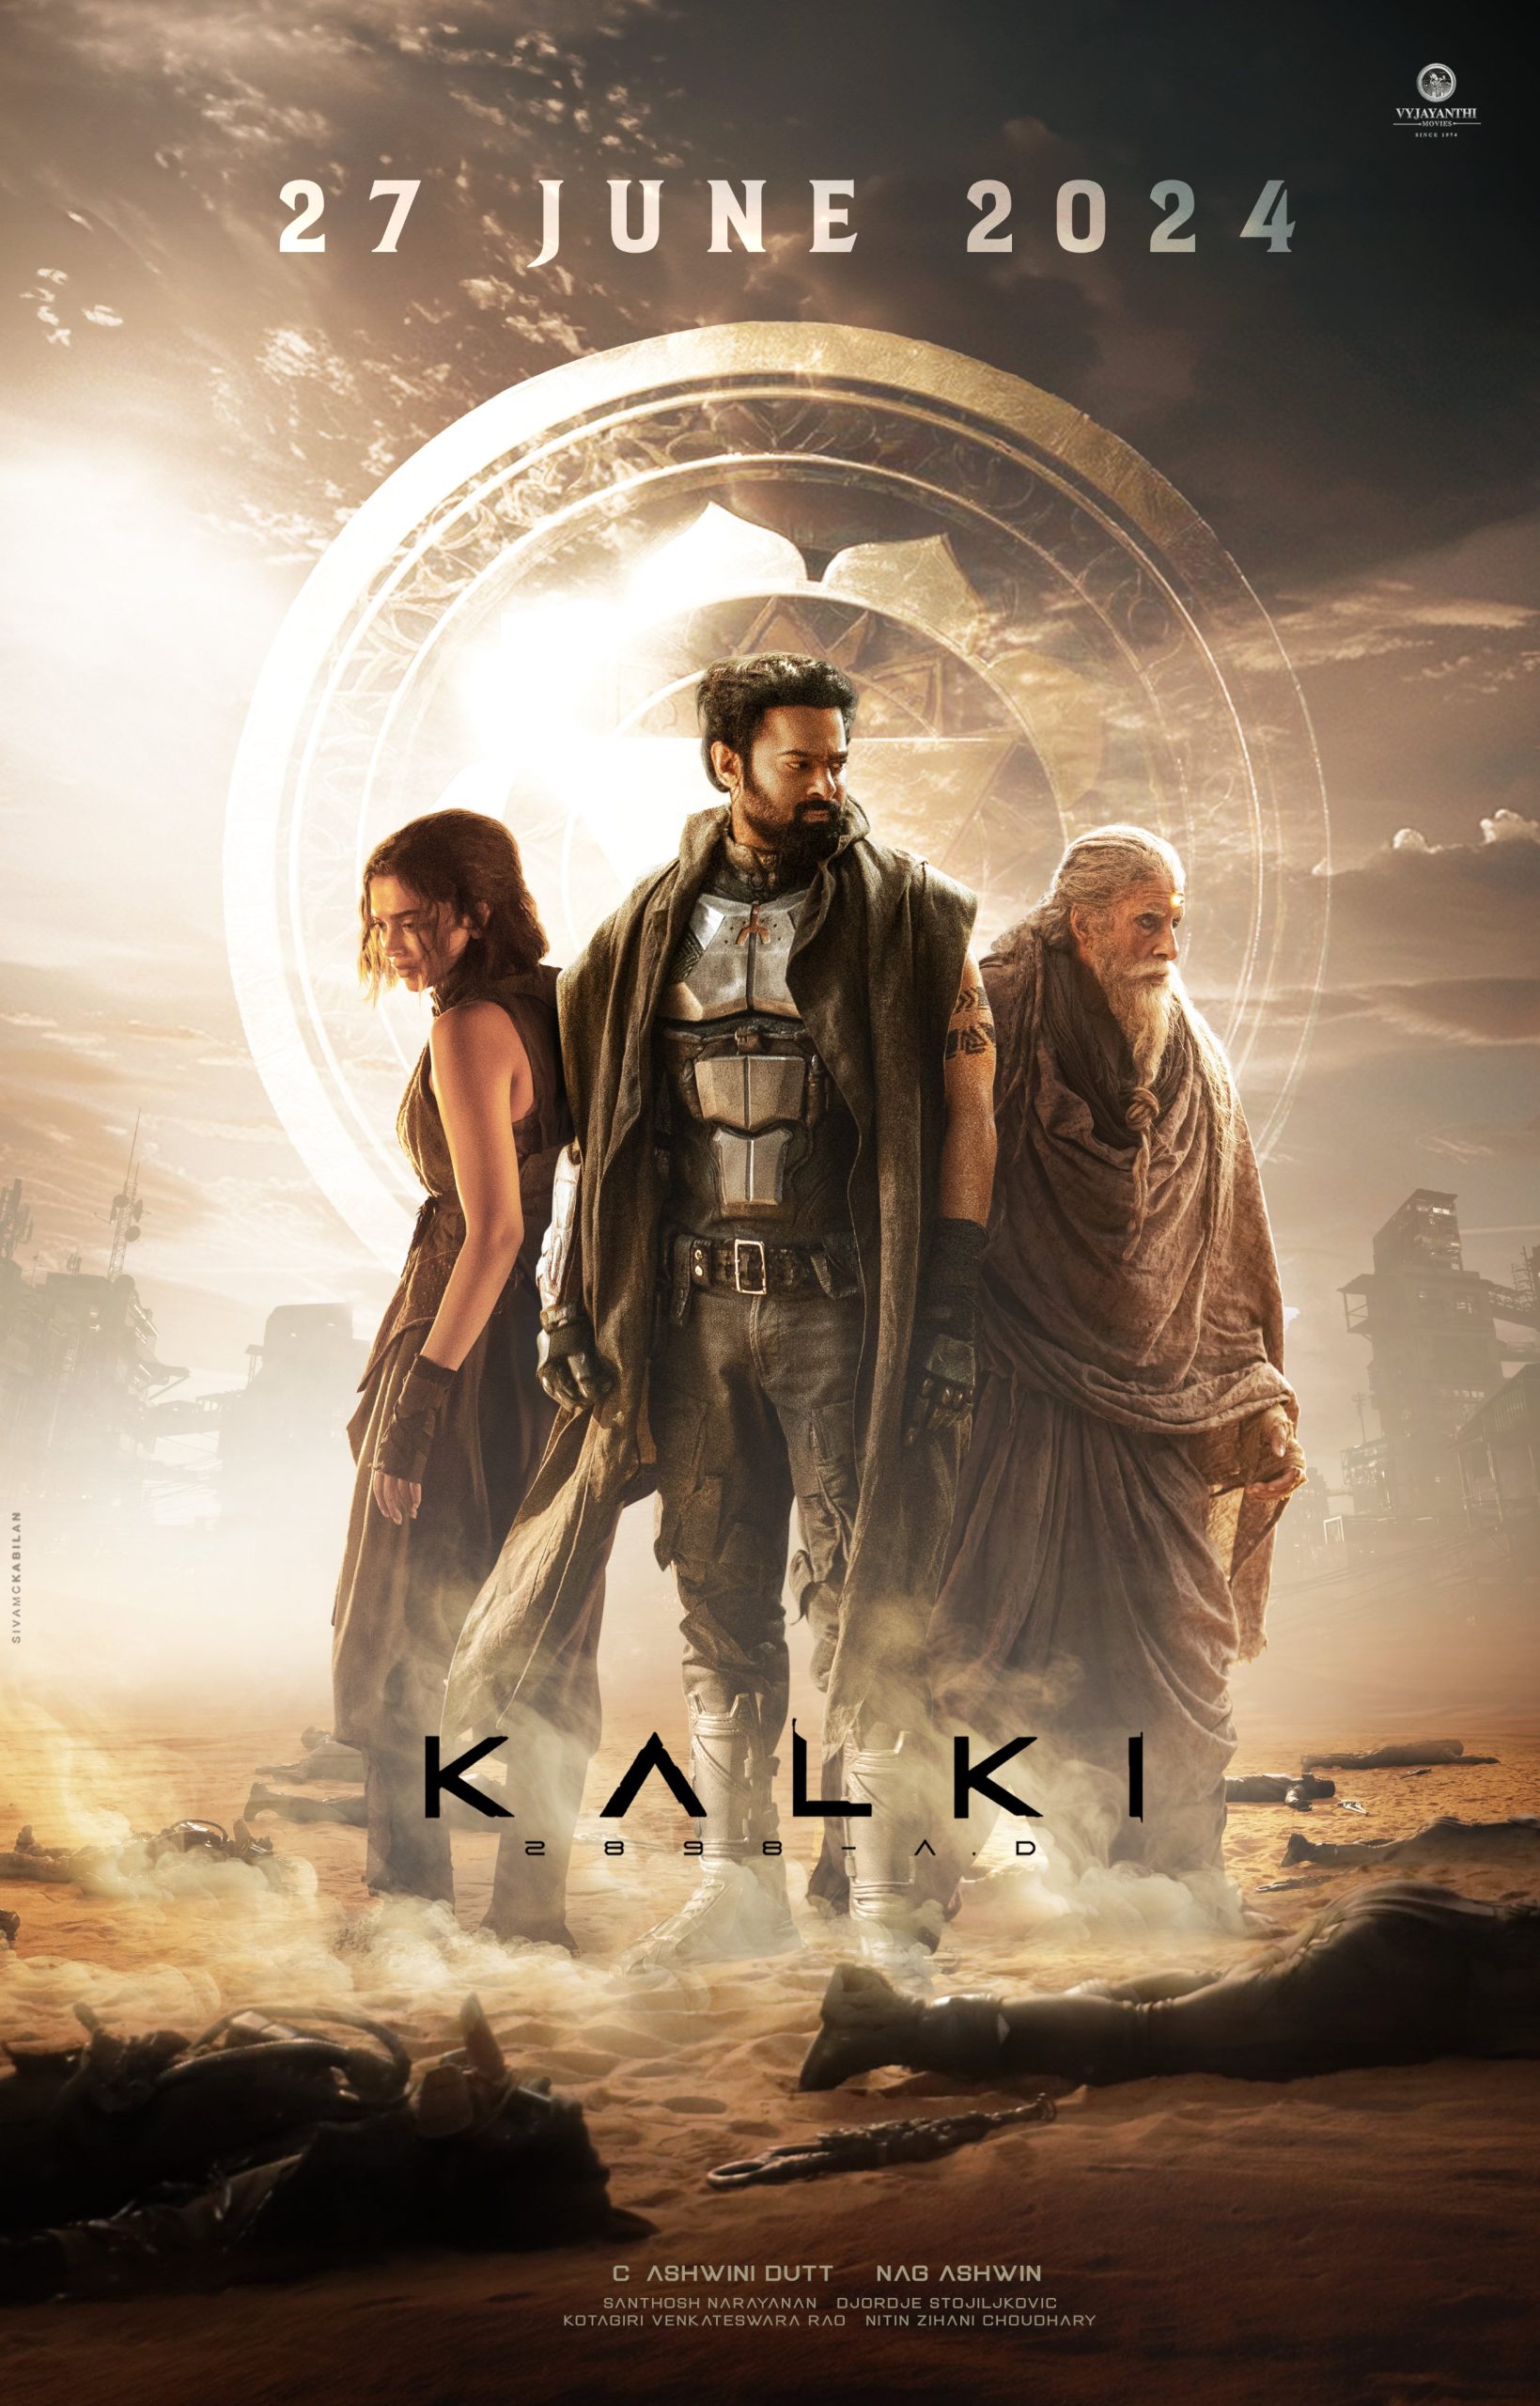 Kalki 2898 AD to hit theatres on 27th June 2024